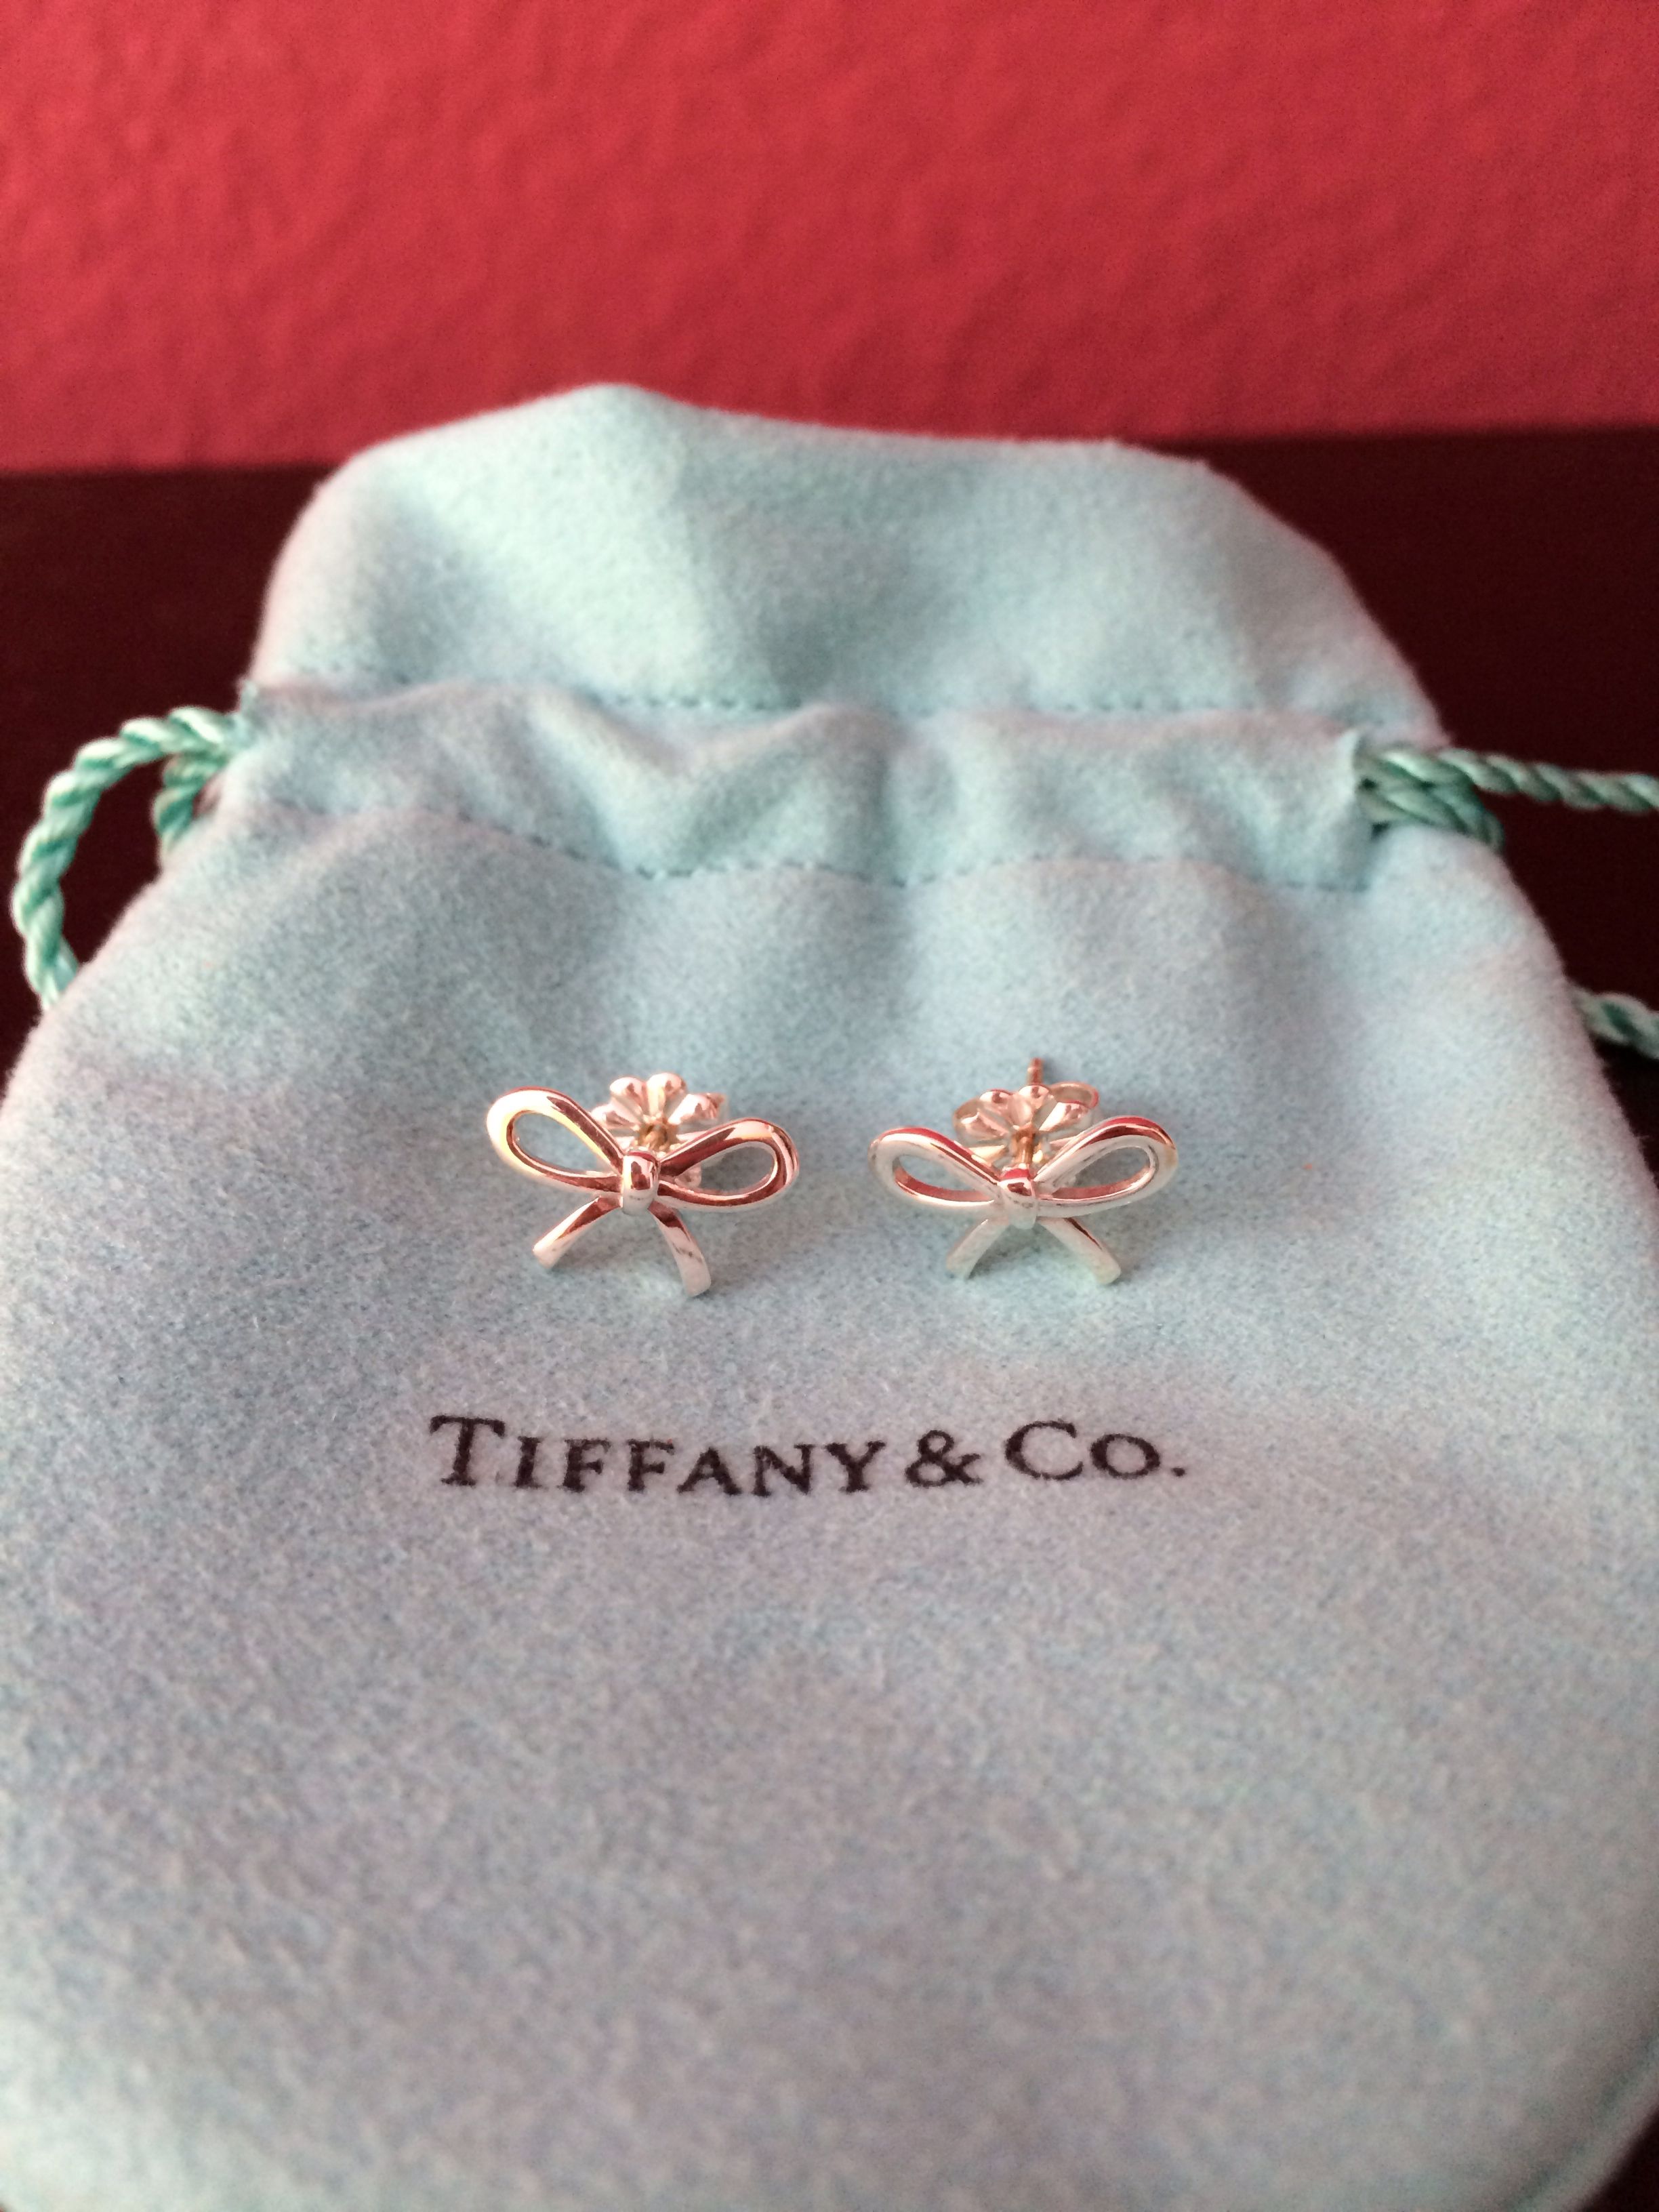 Tiffany and Co bow earrings, I want these so bad. Gonna buy them for myself mayb...